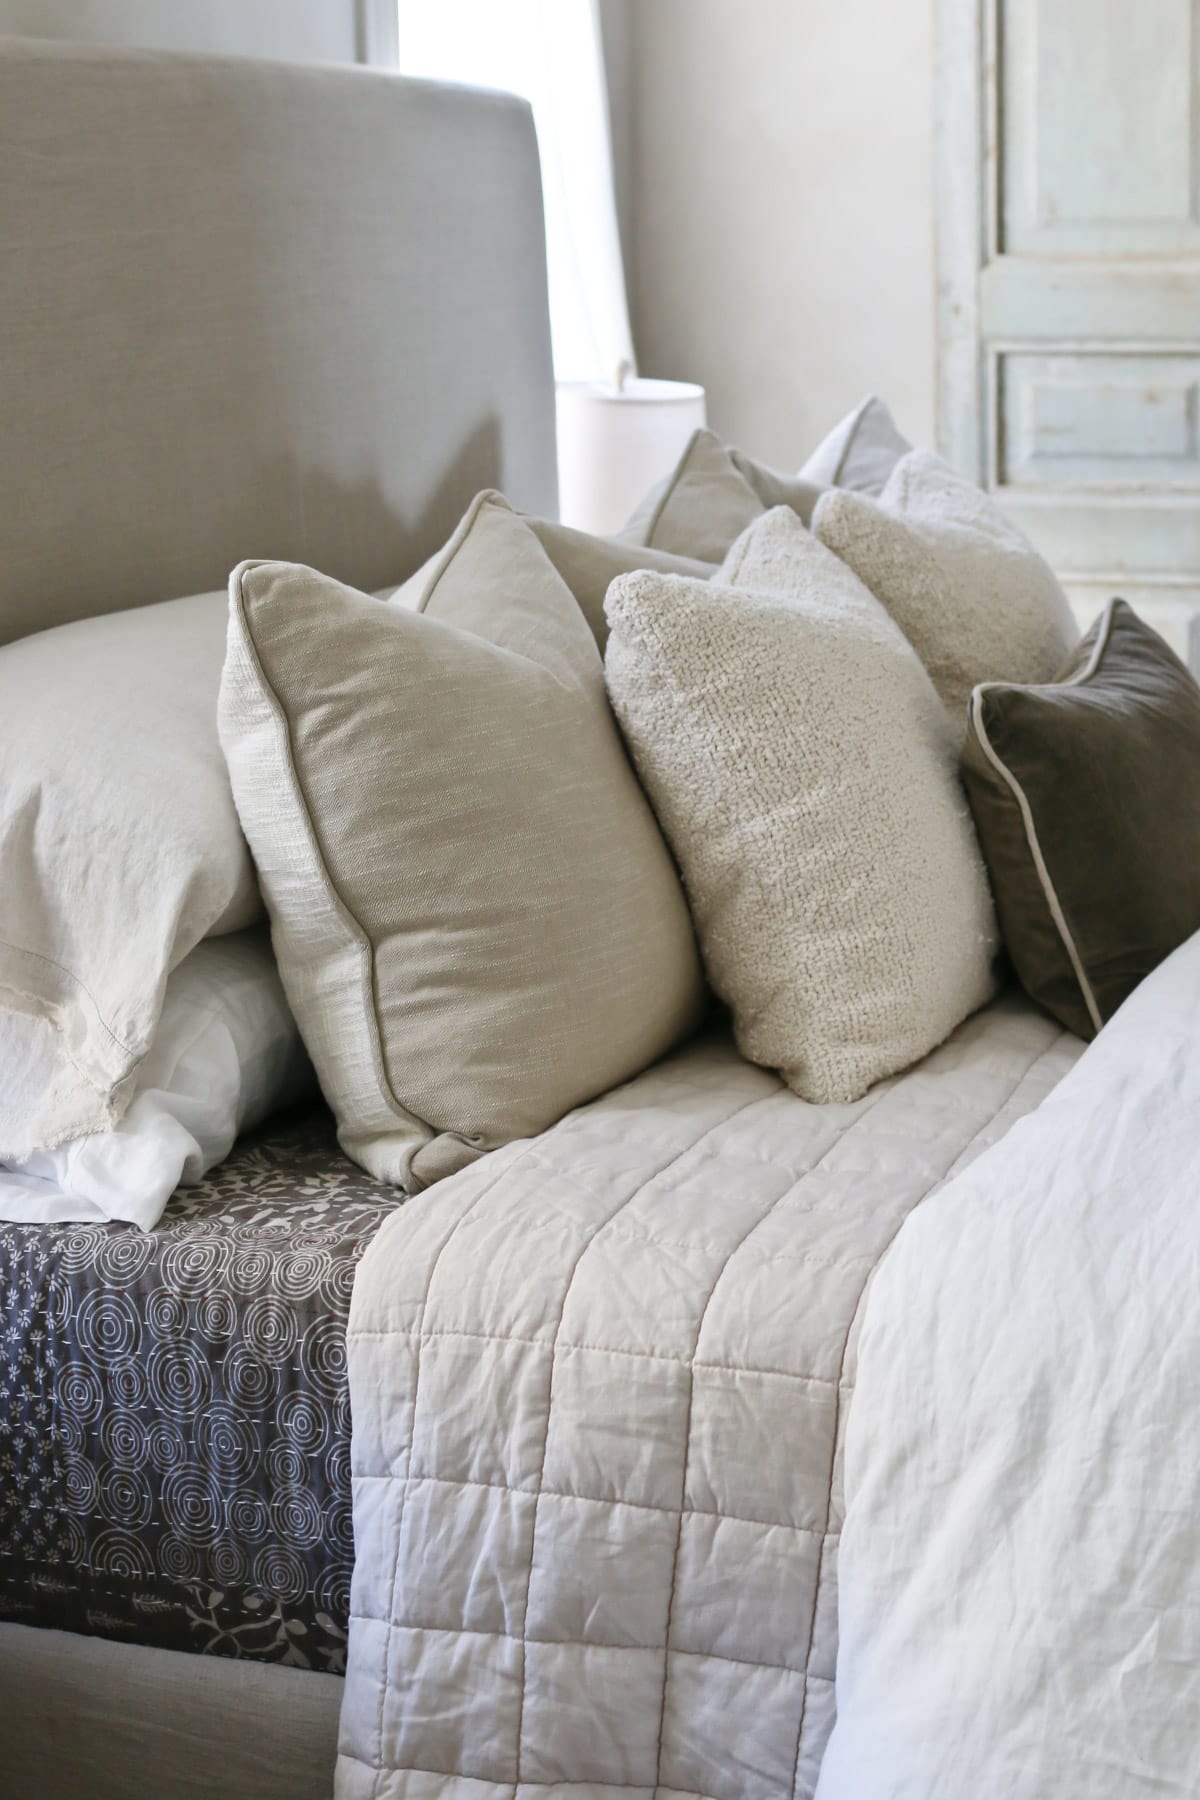 How to style a bed like a designer